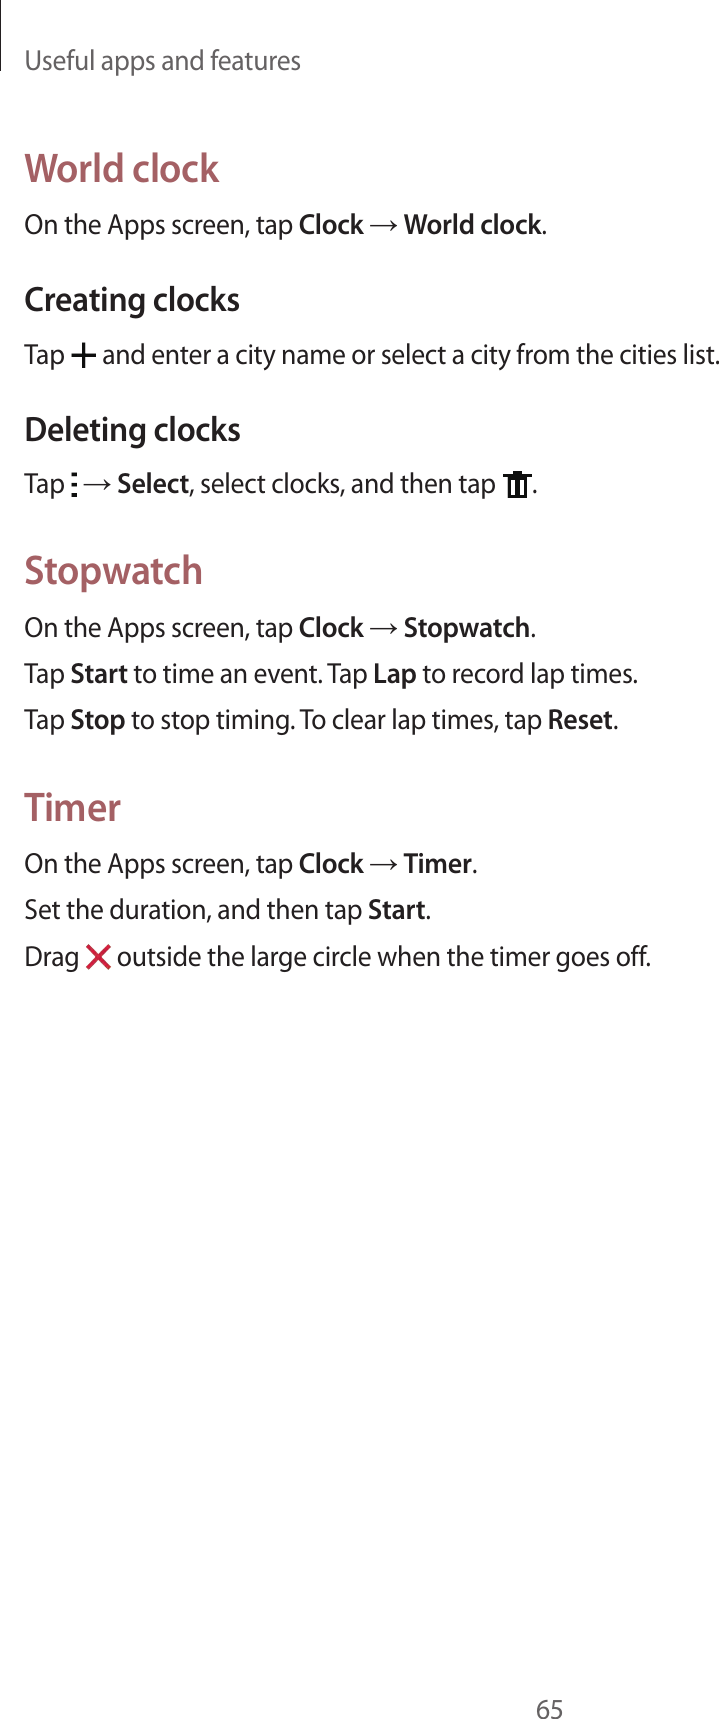 Useful apps and features65World clockOn the Apps screen, tap Clock → World clock.Creating clocksTap   and enter a city name or select a city from the cities list.Deleting clocksTap   → Select, select clocks, and then tap  .StopwatchOn the Apps screen, tap Clock → Stopwatch.Tap Start to time an event. Tap Lap to record lap times.Tap Stop to stop timing. To clear lap times, tap Reset.TimerOn the Apps screen, tap Clock → Timer.Set the duration, and then tap Start.Drag   outside the large circle when the timer goes off.